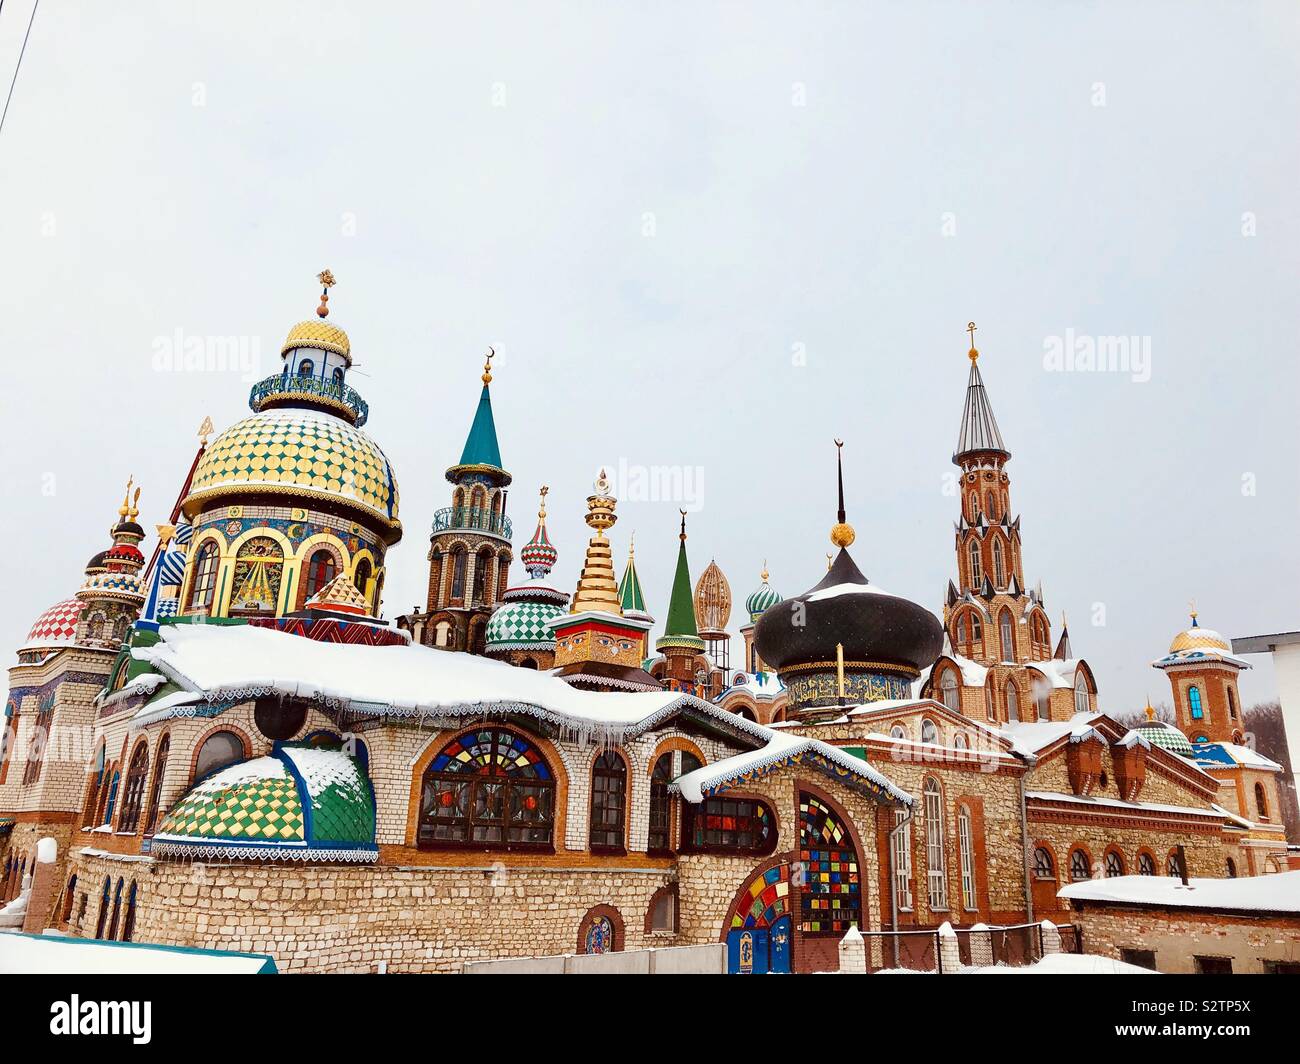 Temple of all religions in Kazan Stock Photo